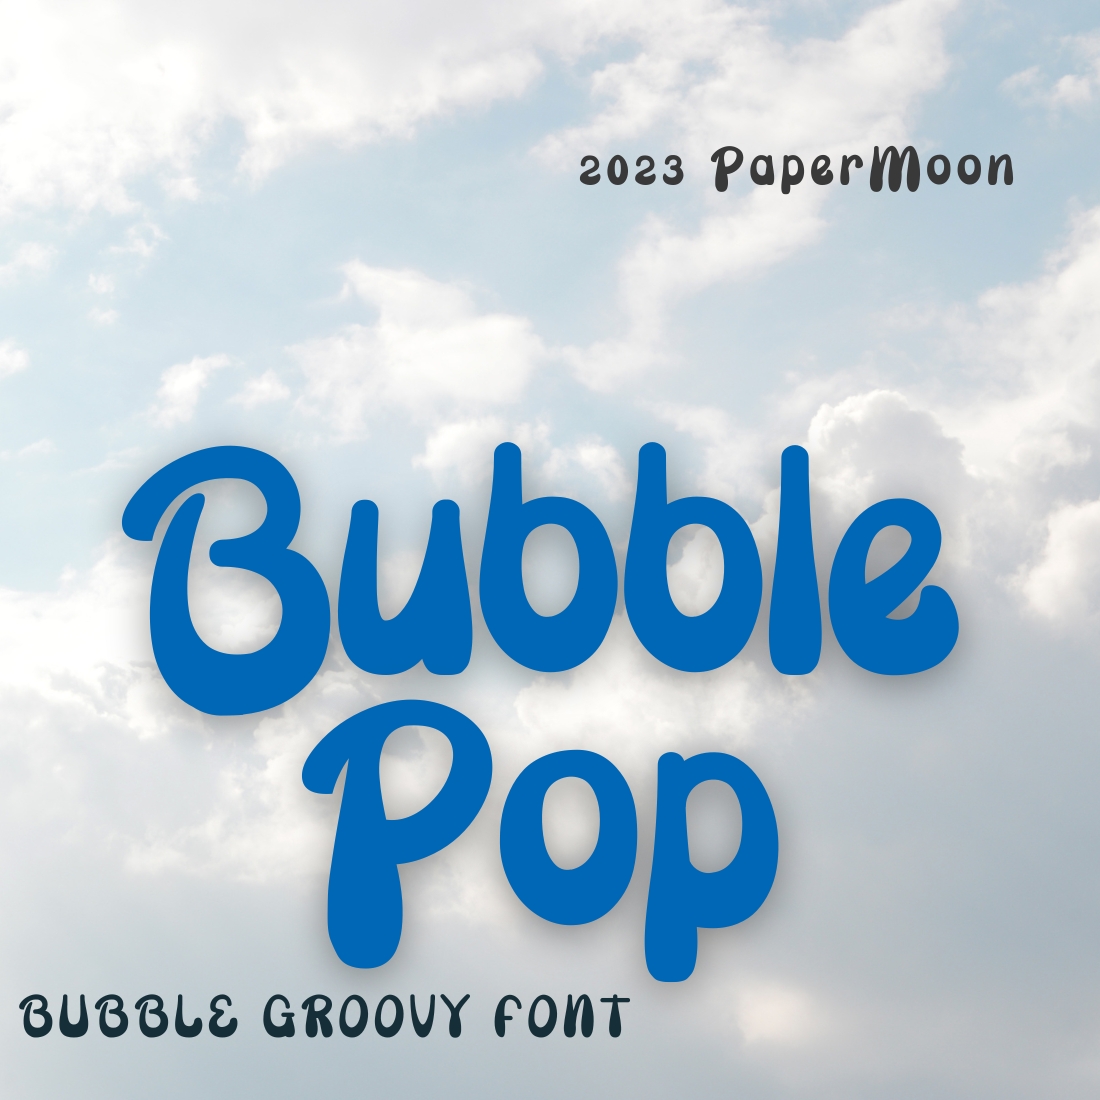 BubblePop Groovy Display Font cover image.